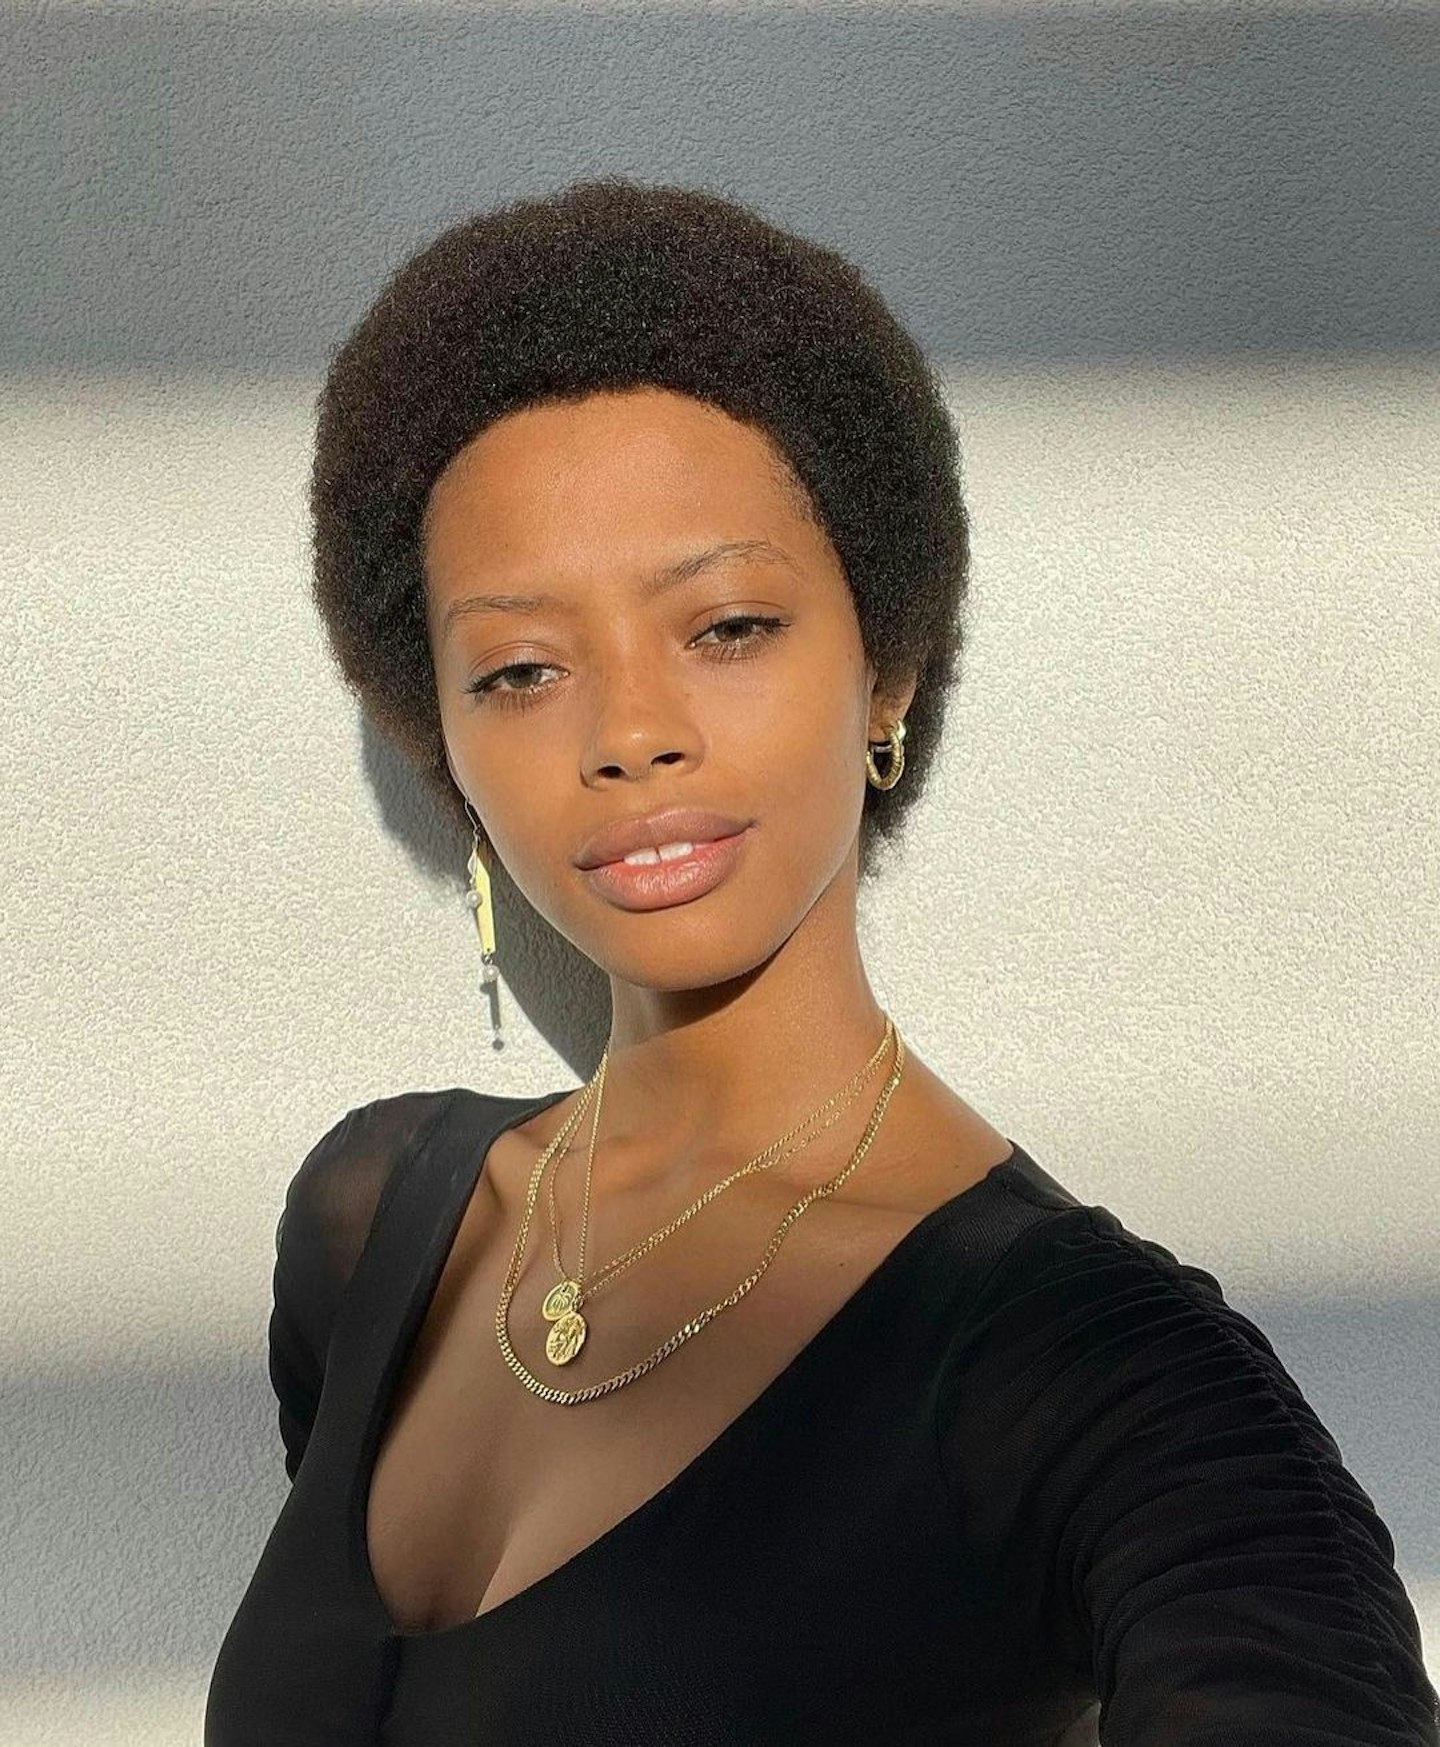 The Archetypal Afro Cut - Hairstyles for Short, Textured Afro Hair